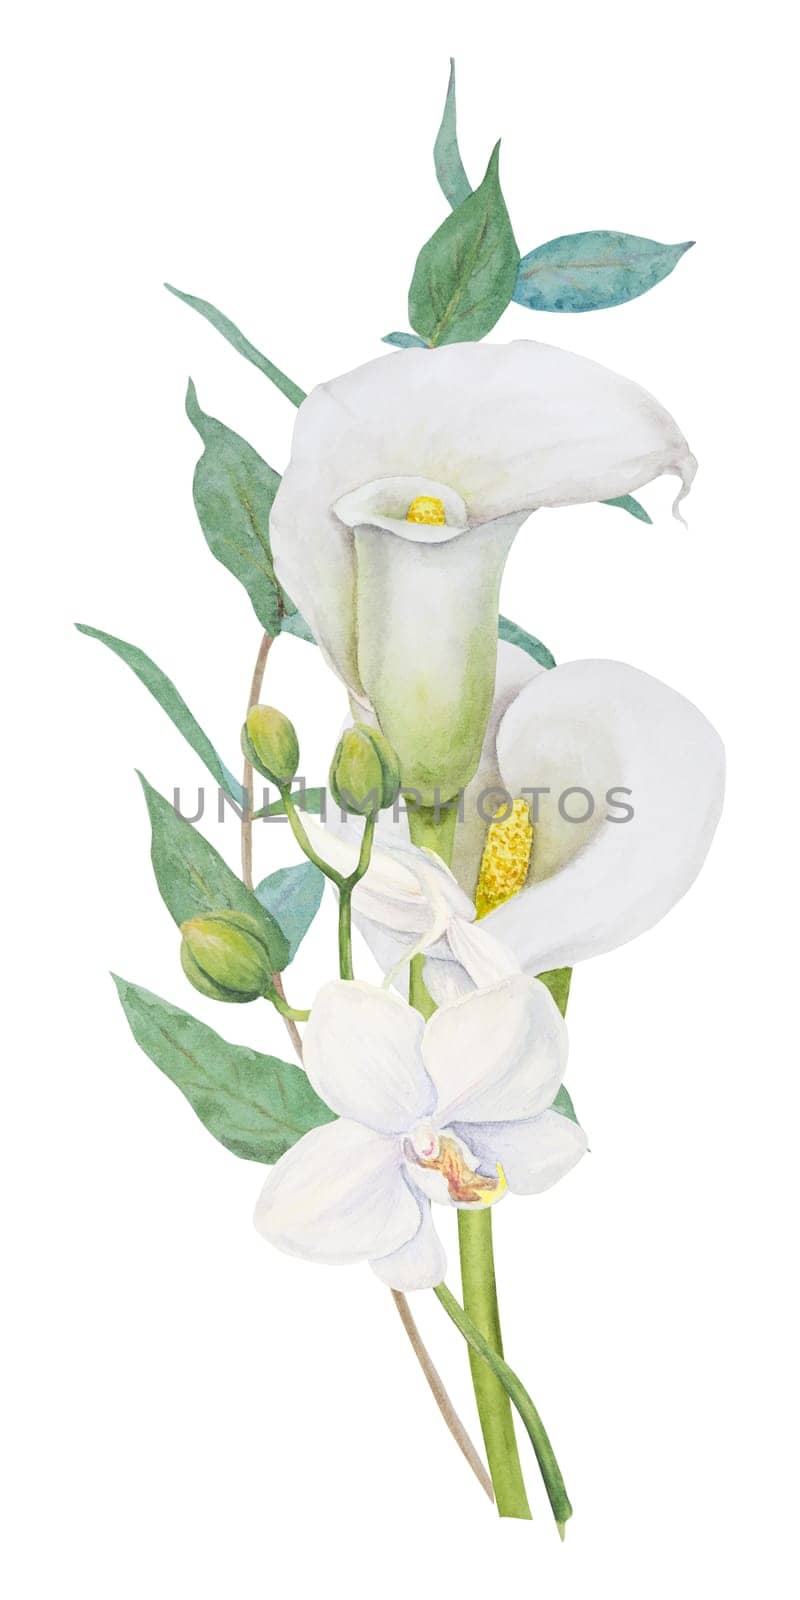 Watercolor clipart of white calla lily, orchid flower and eucaliptus branch. Handdrawn floral illustration for wedding invitations, floristic, beauty salon. Isolated composition of tropical water arum by florainlove_art